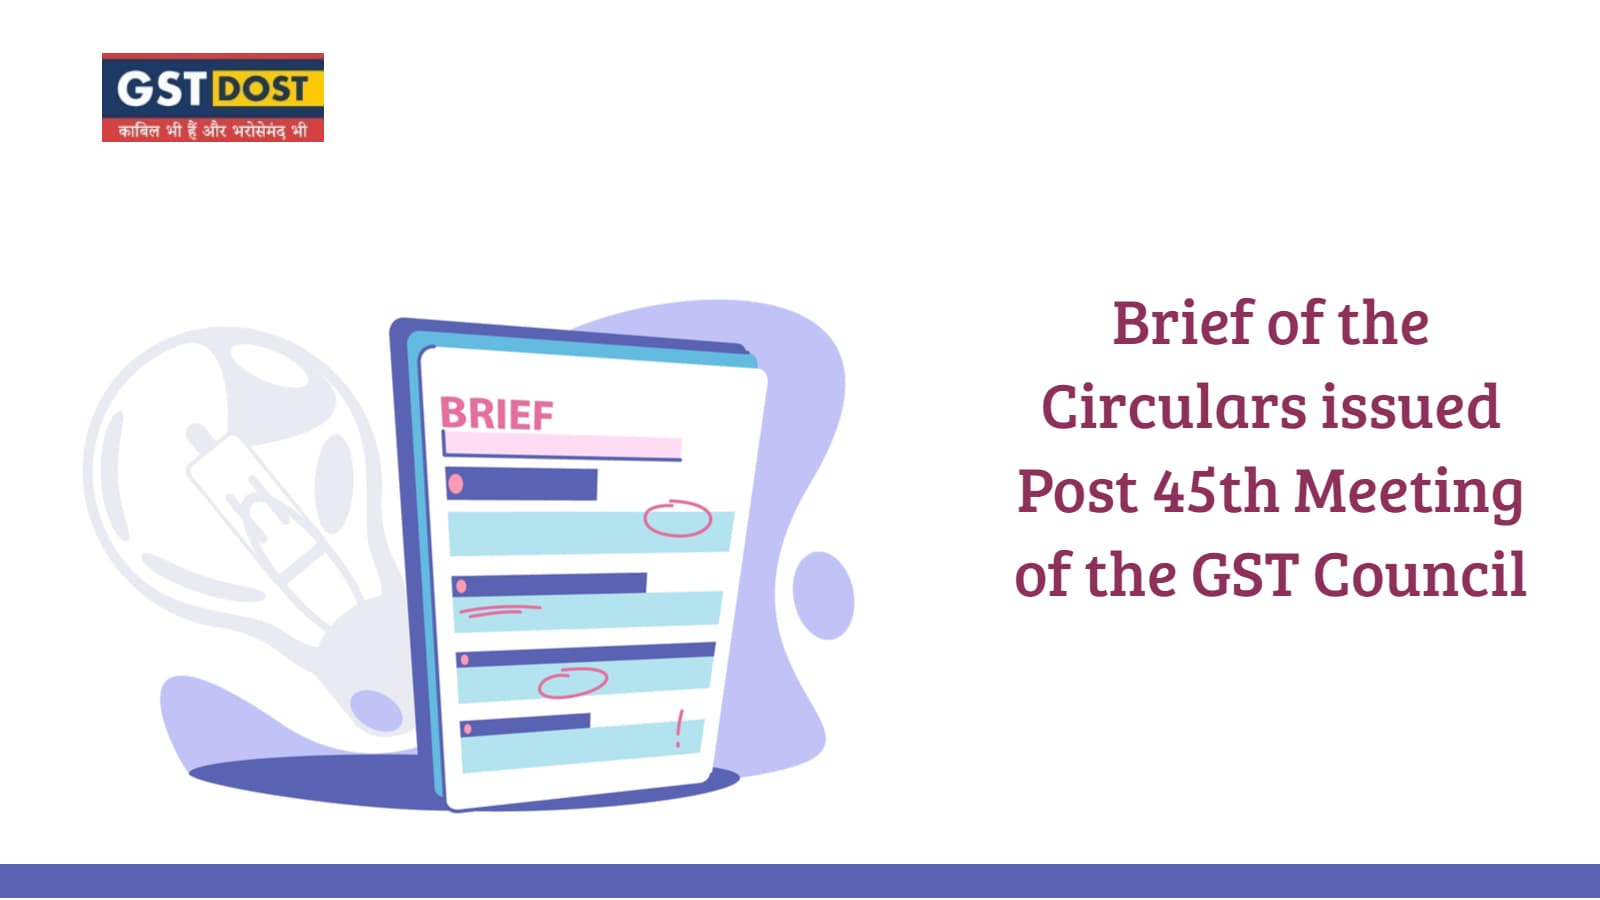 Brief of the Circulars issued post 45th Meeting of the GST Council